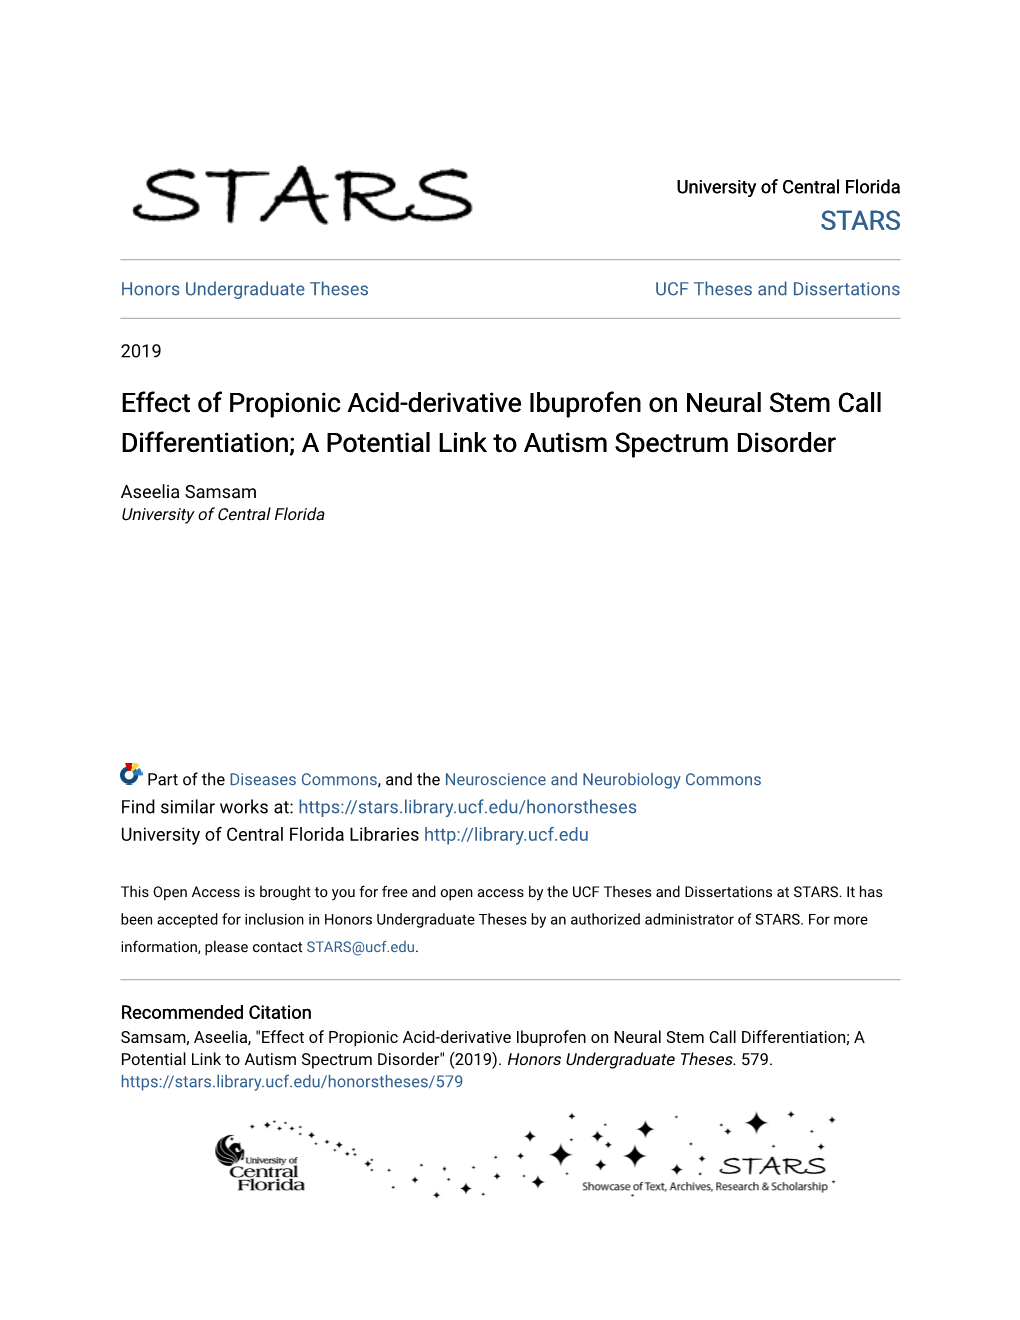 Effect of Propionic Acid-Derivative Ibuprofen on Neural Stem Call Differentiation; a Potential Link to Autism Spectrum Disorder